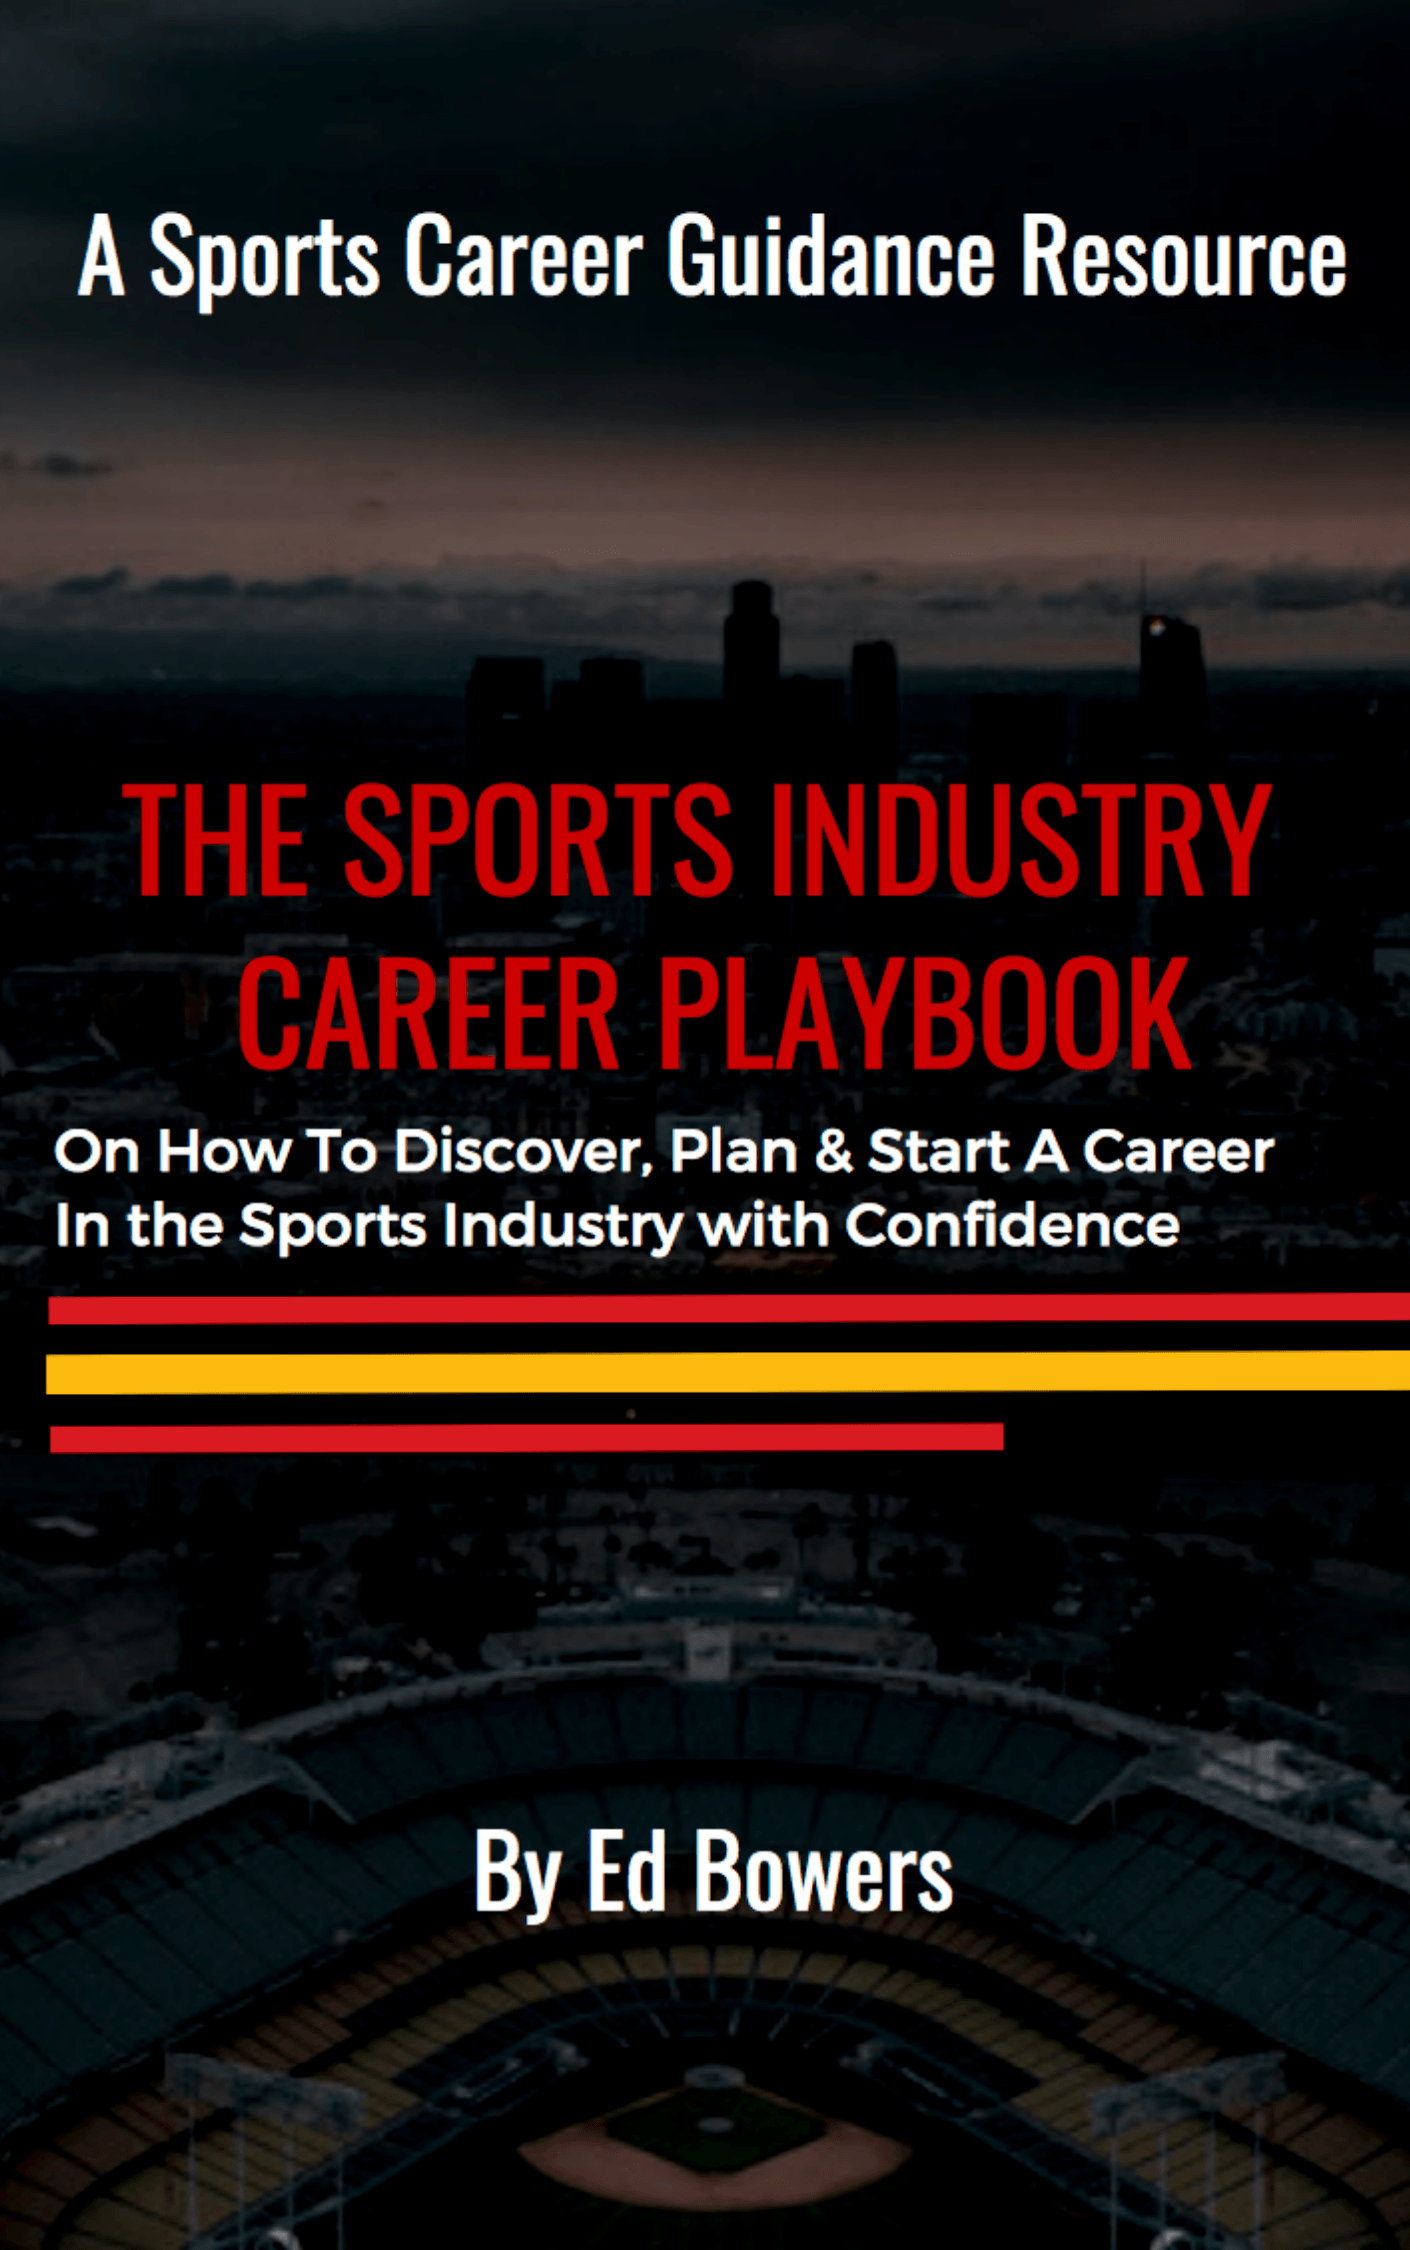 The Sports Career Playbook